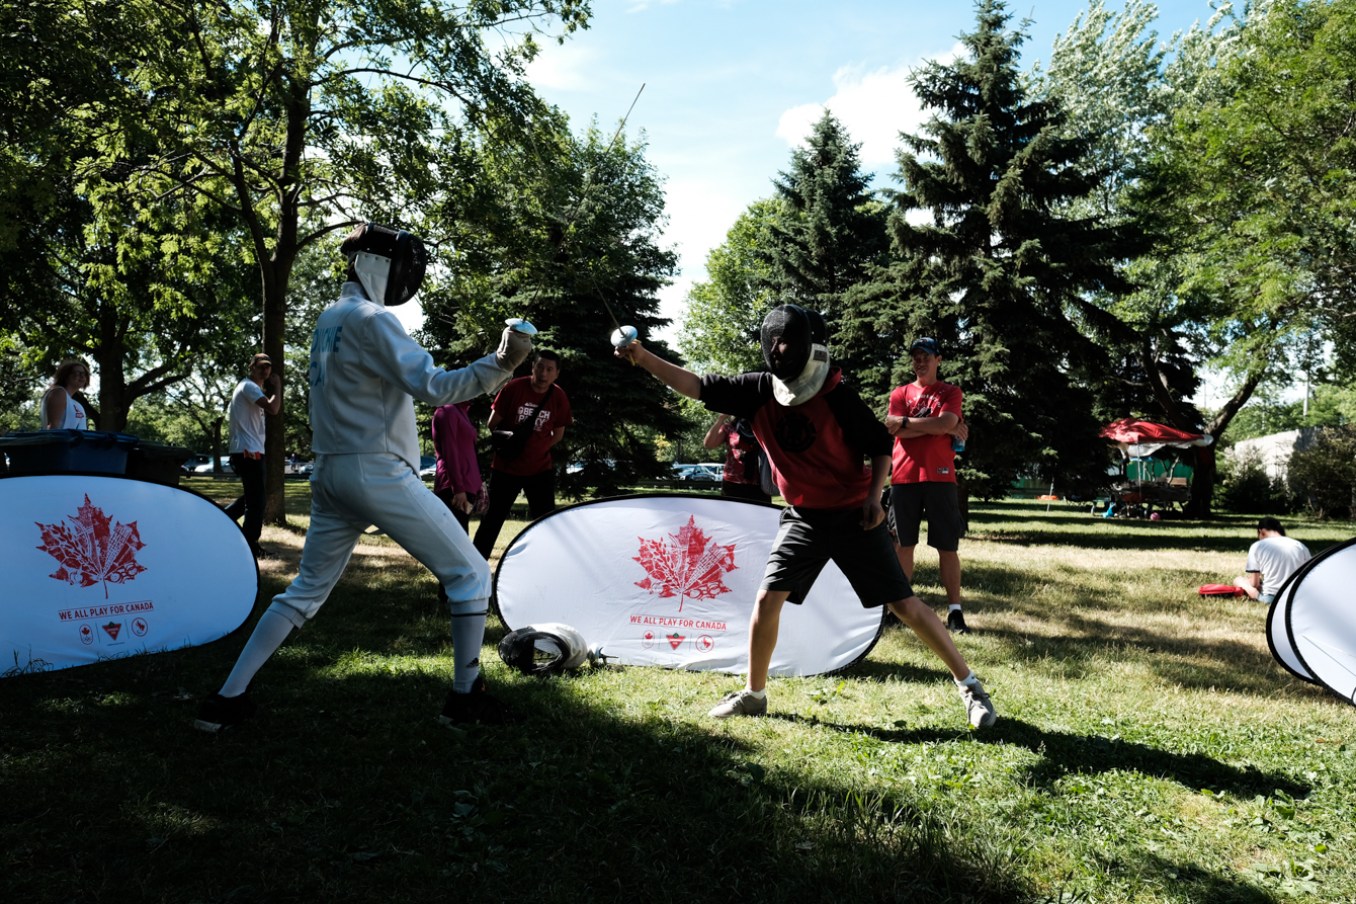 Fans learned how to fence at the Canadian Tire sport demonstration at the Team Canada Beach Party.